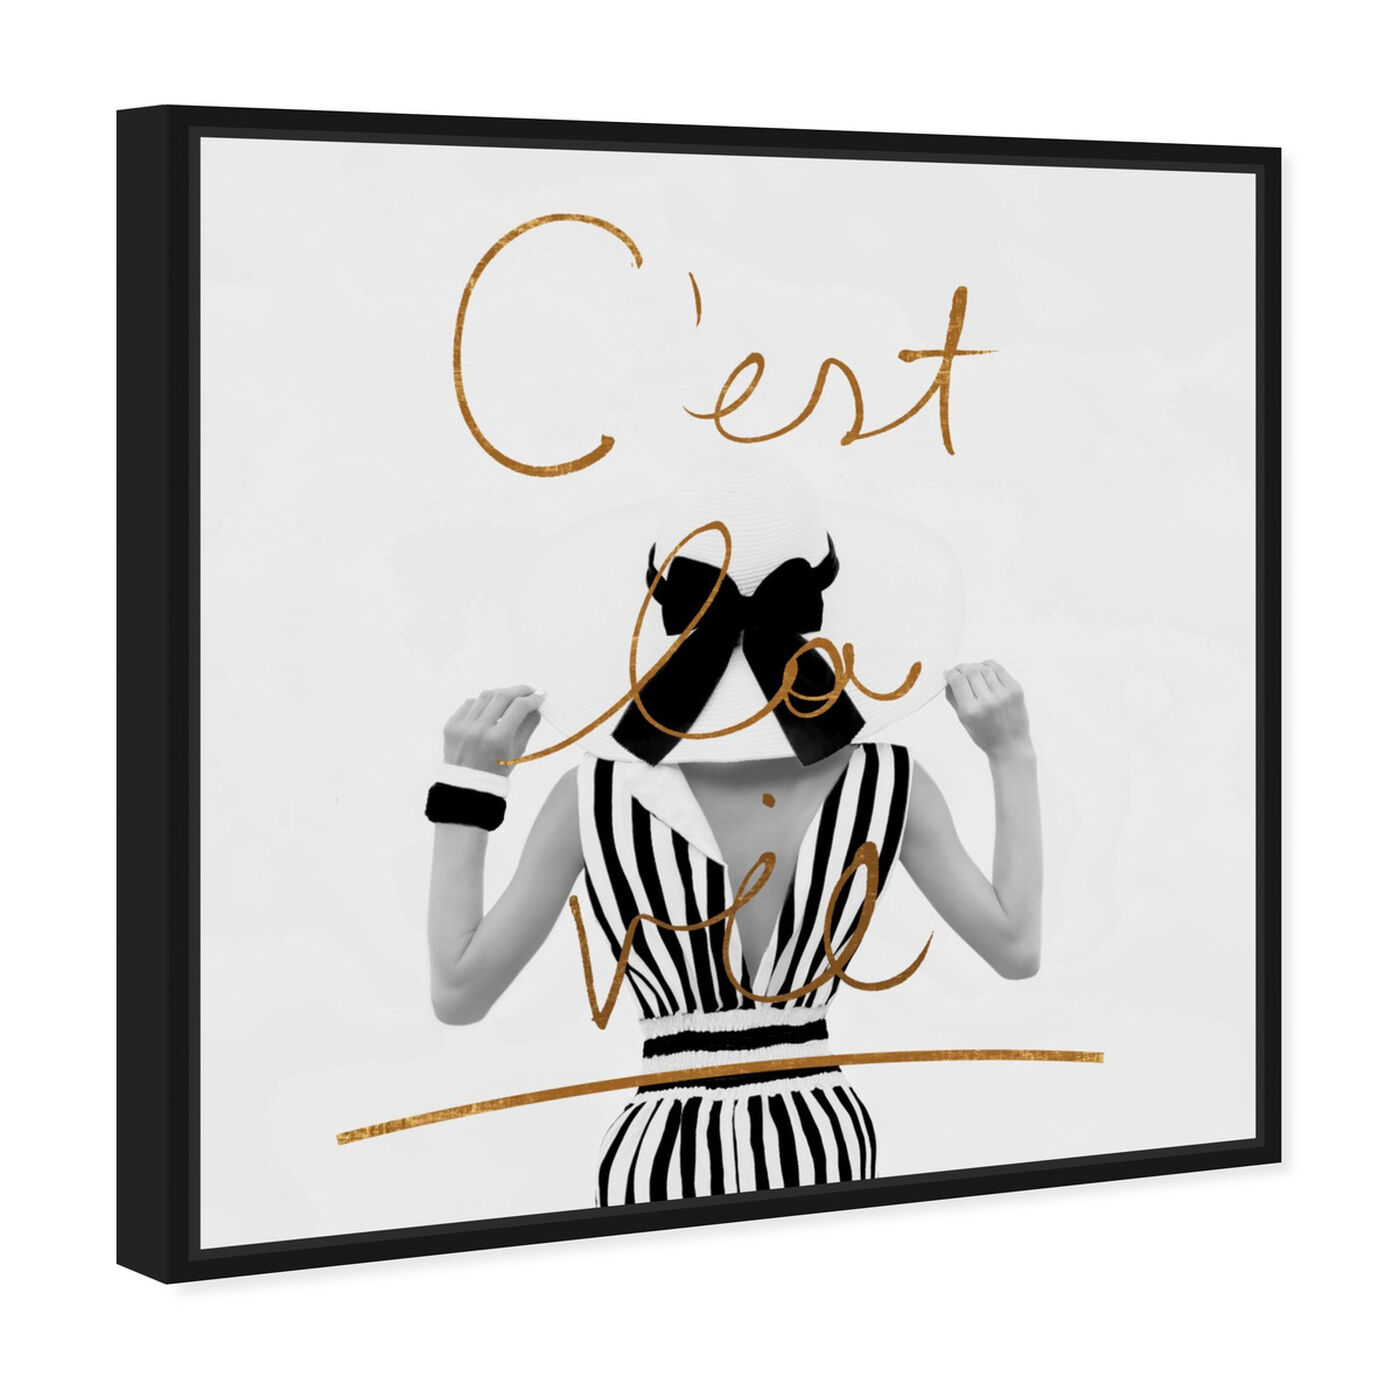 Angled view of Cest La Vie featuring typography and quotes and quotes and sayings art.